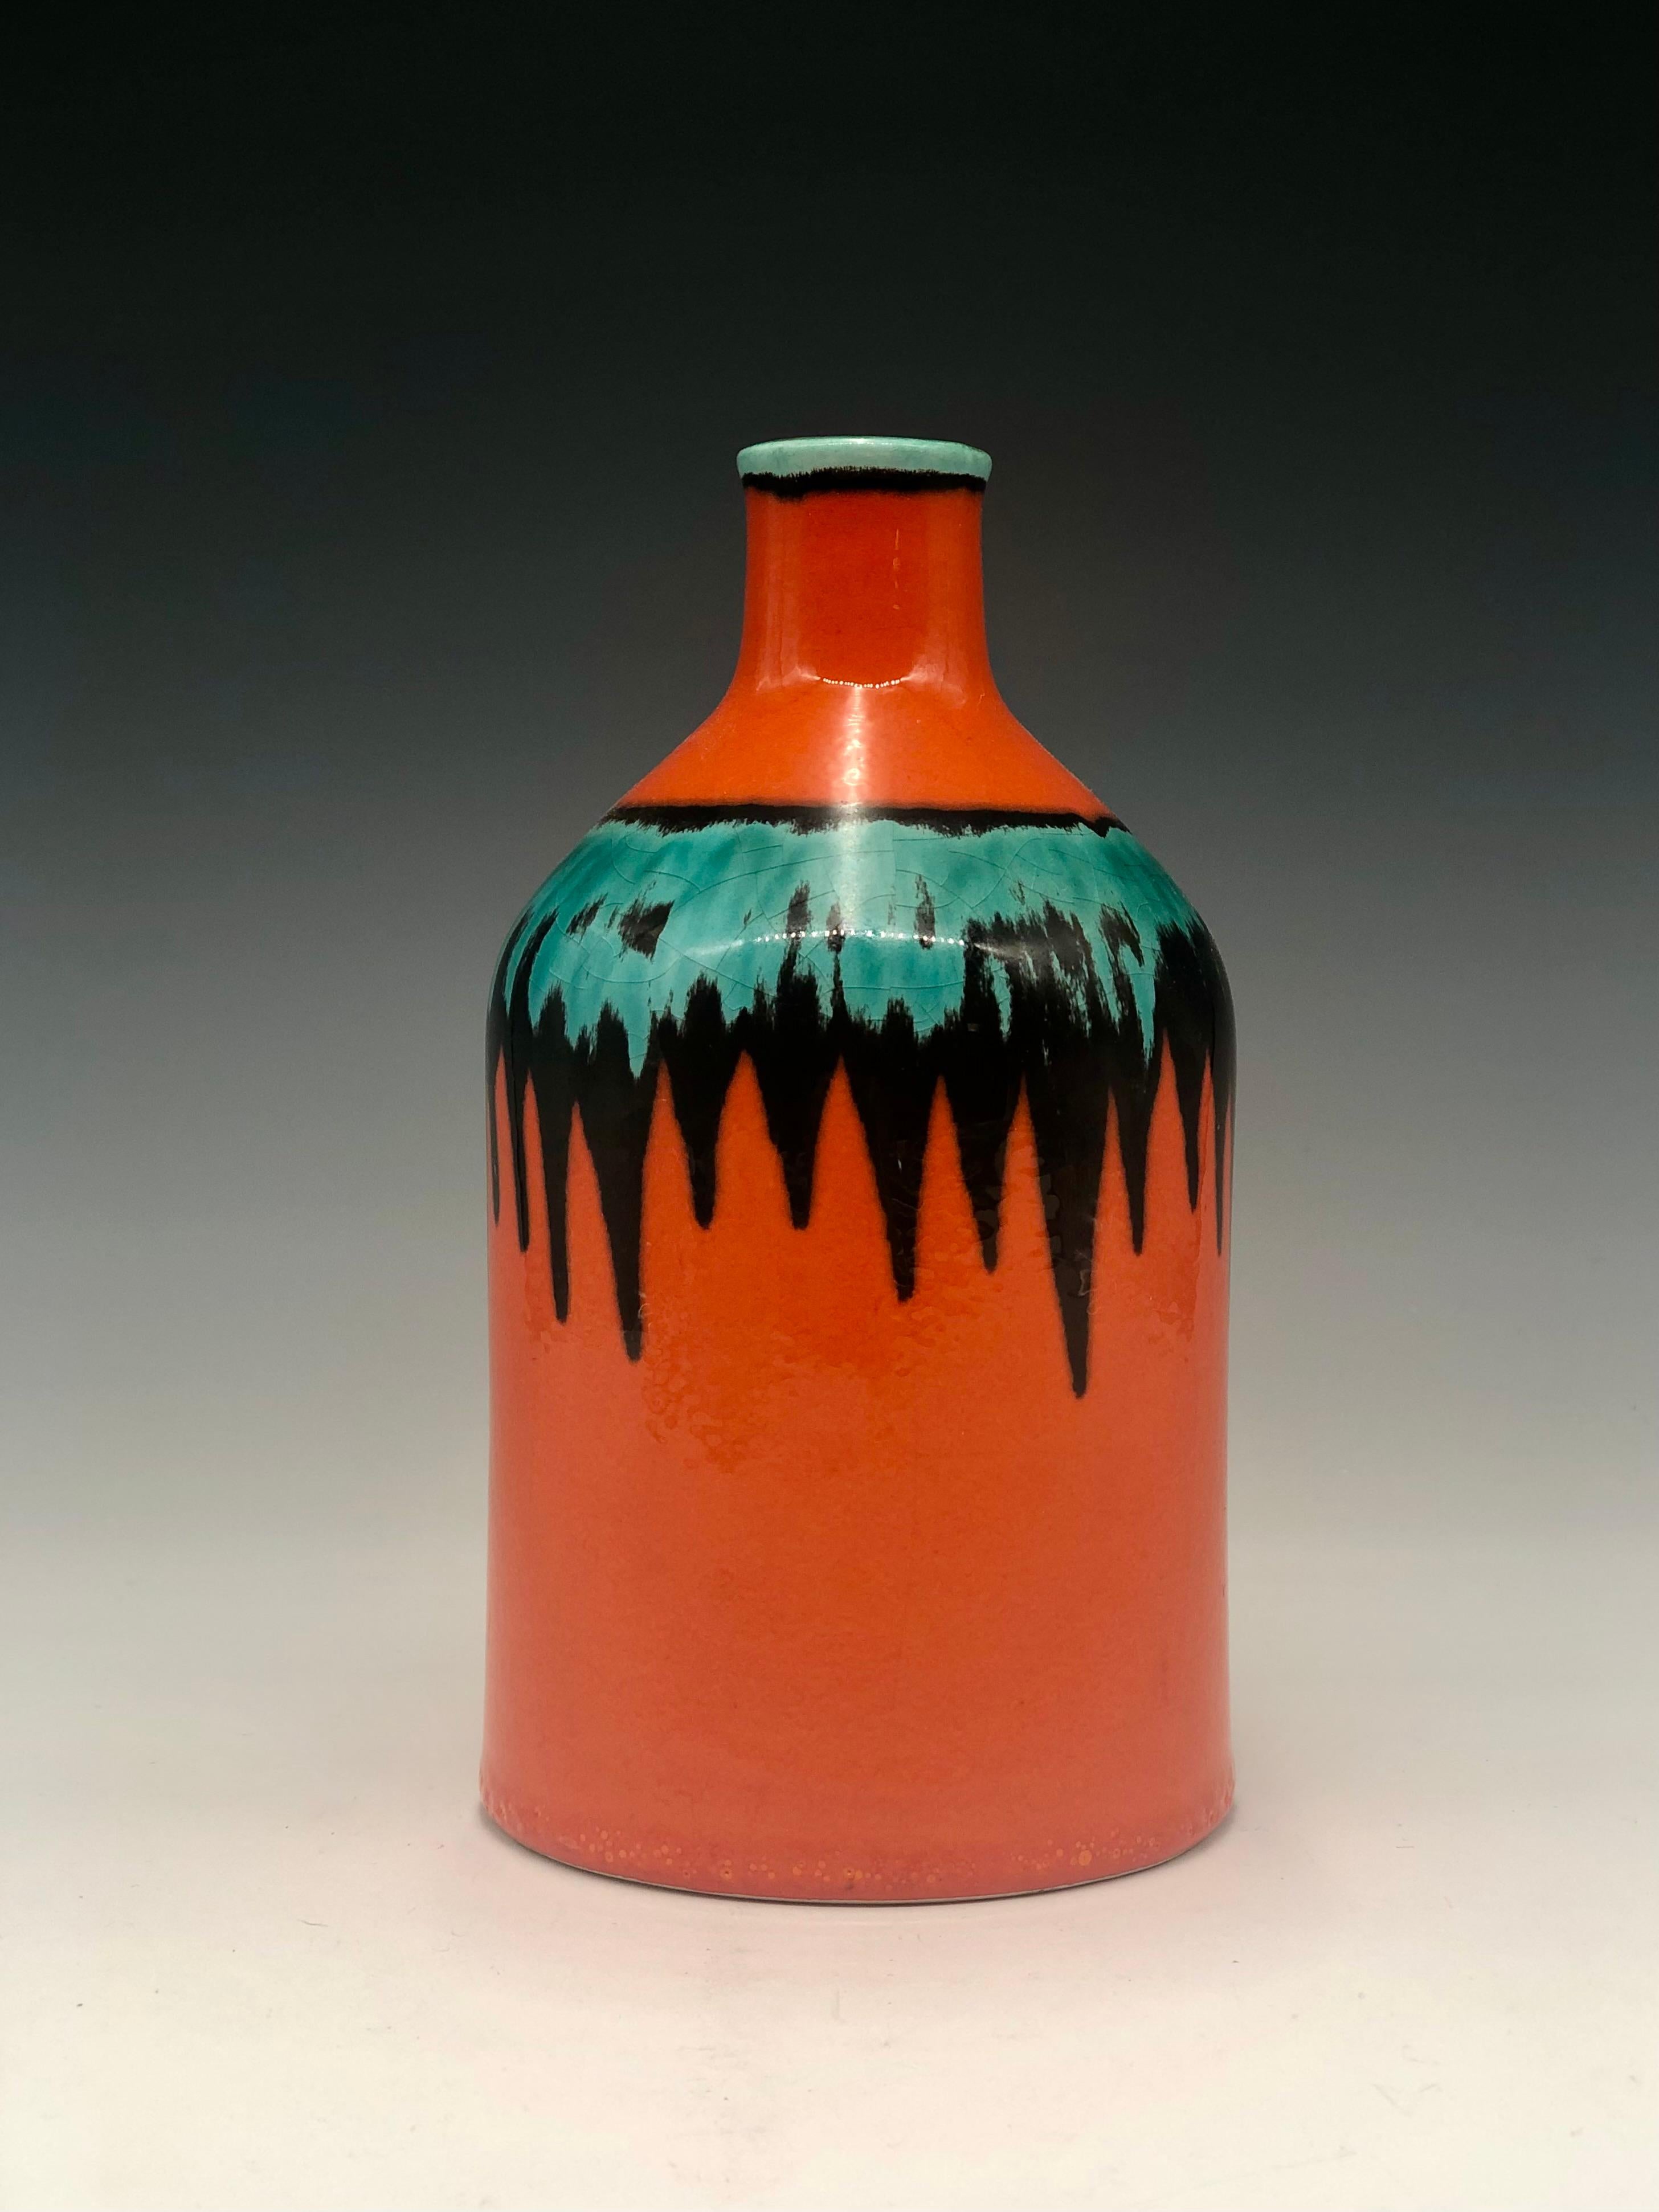 Bright, bold colored orange, black, and aqua green mid-century vase by Cortendorf. A beautiful, bold example of West German Art Pottery from the 1950s. It has its original maker's label, 